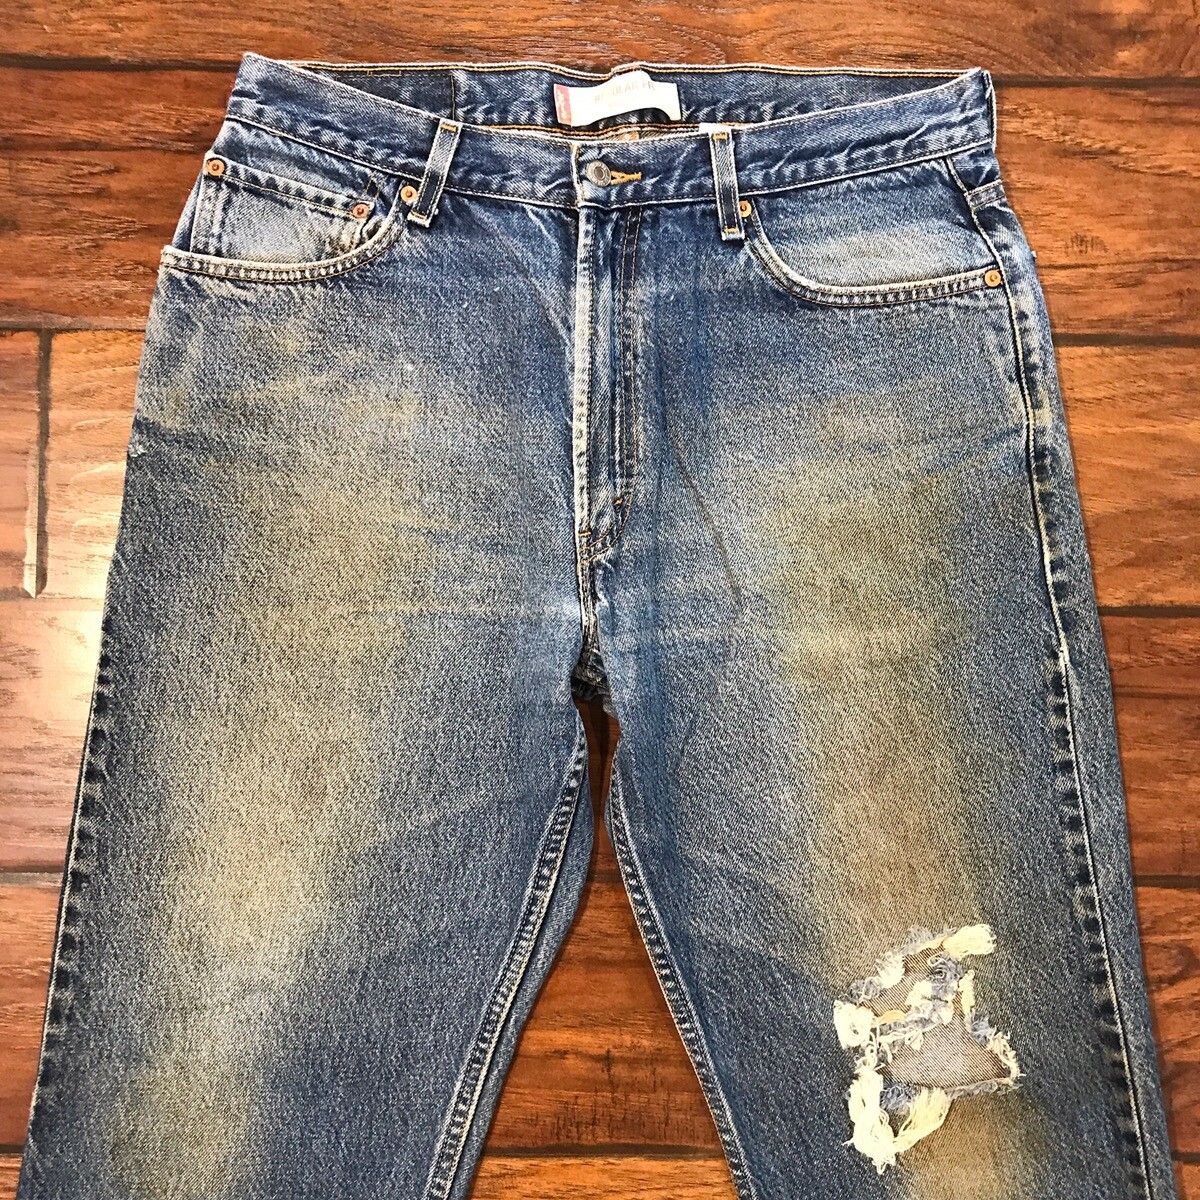 Vintage Vintage 1990’s Levi’s 505 Heavily Distressed Faded Jeans Size US 34 / EU 50 - 2 Preview